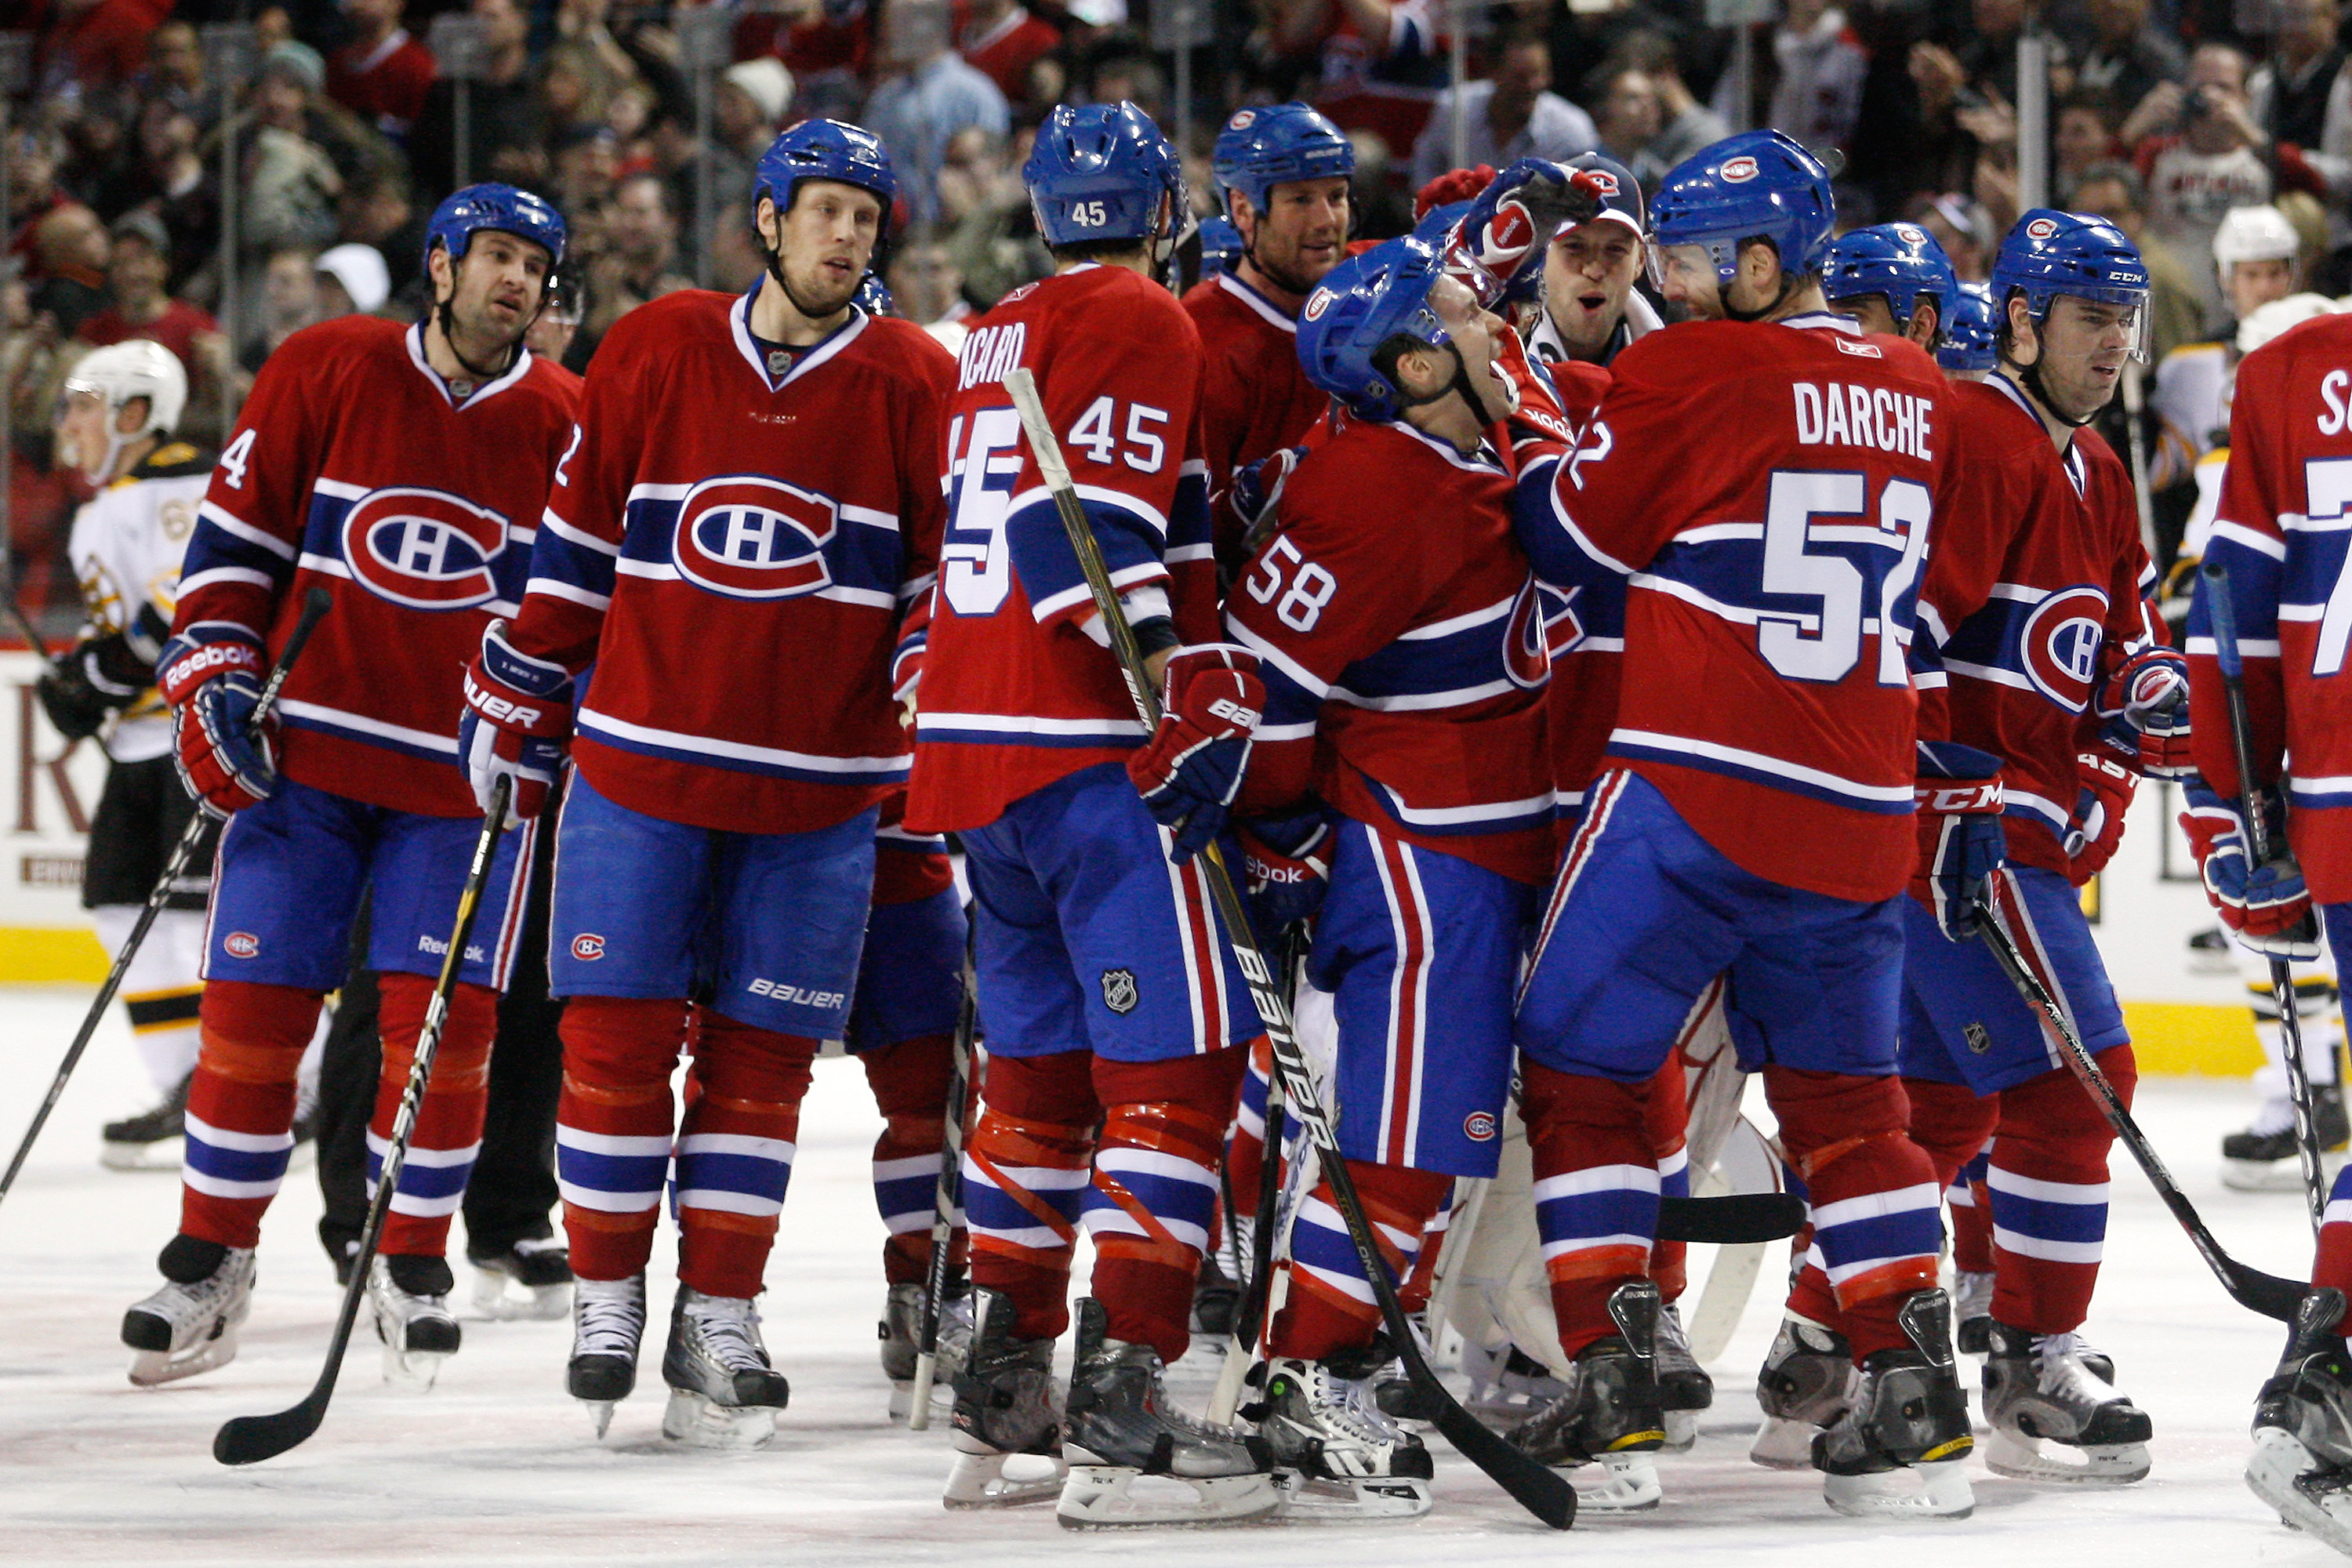 MONTREAL, CANADA - JANUARY 8:  Members of the Montreal Canadiens celebrate after beating the Boston Bruins in overtime in the NHL game at the Bell Centre on January 8, 2011 in Montreal, Quebec, Canada.  The Canadiens defeated the Bruins 3-2 in overtime.